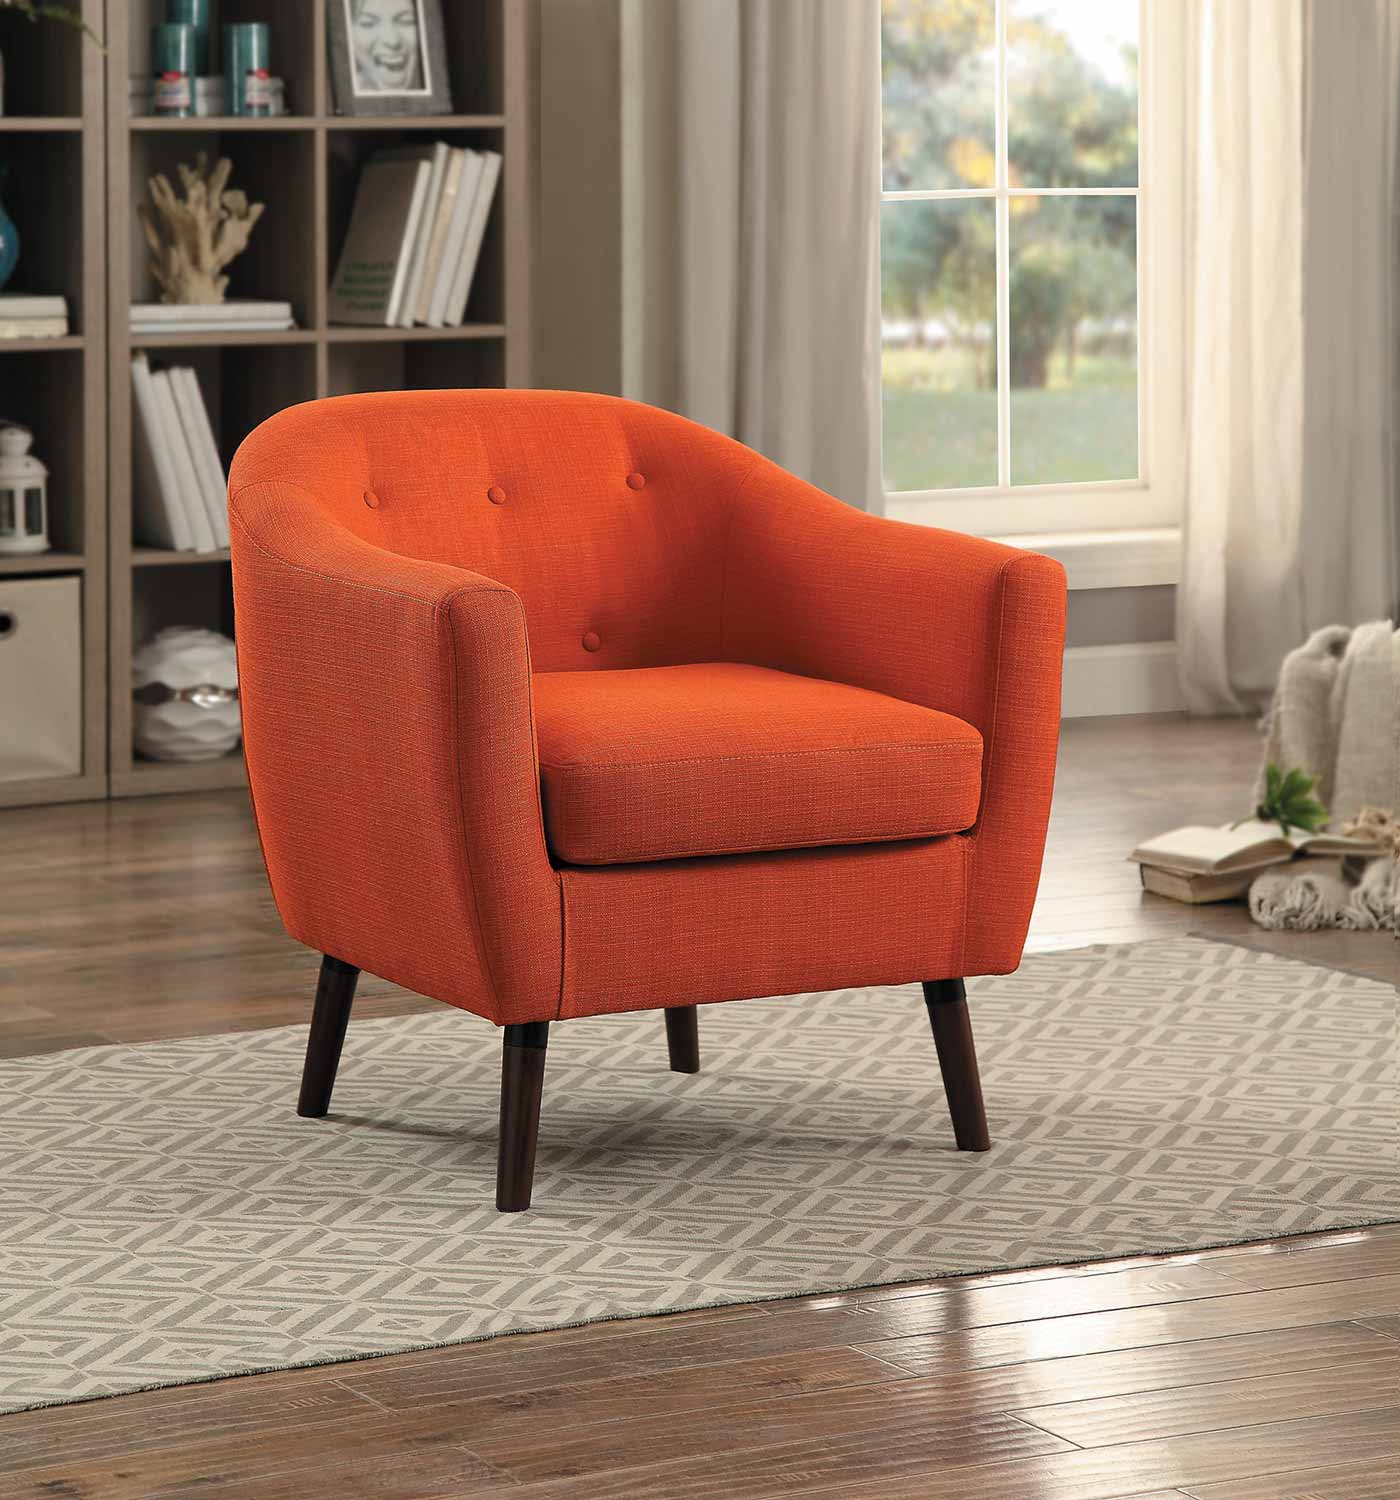 Homelegance Lucille Accent Chair - Orange